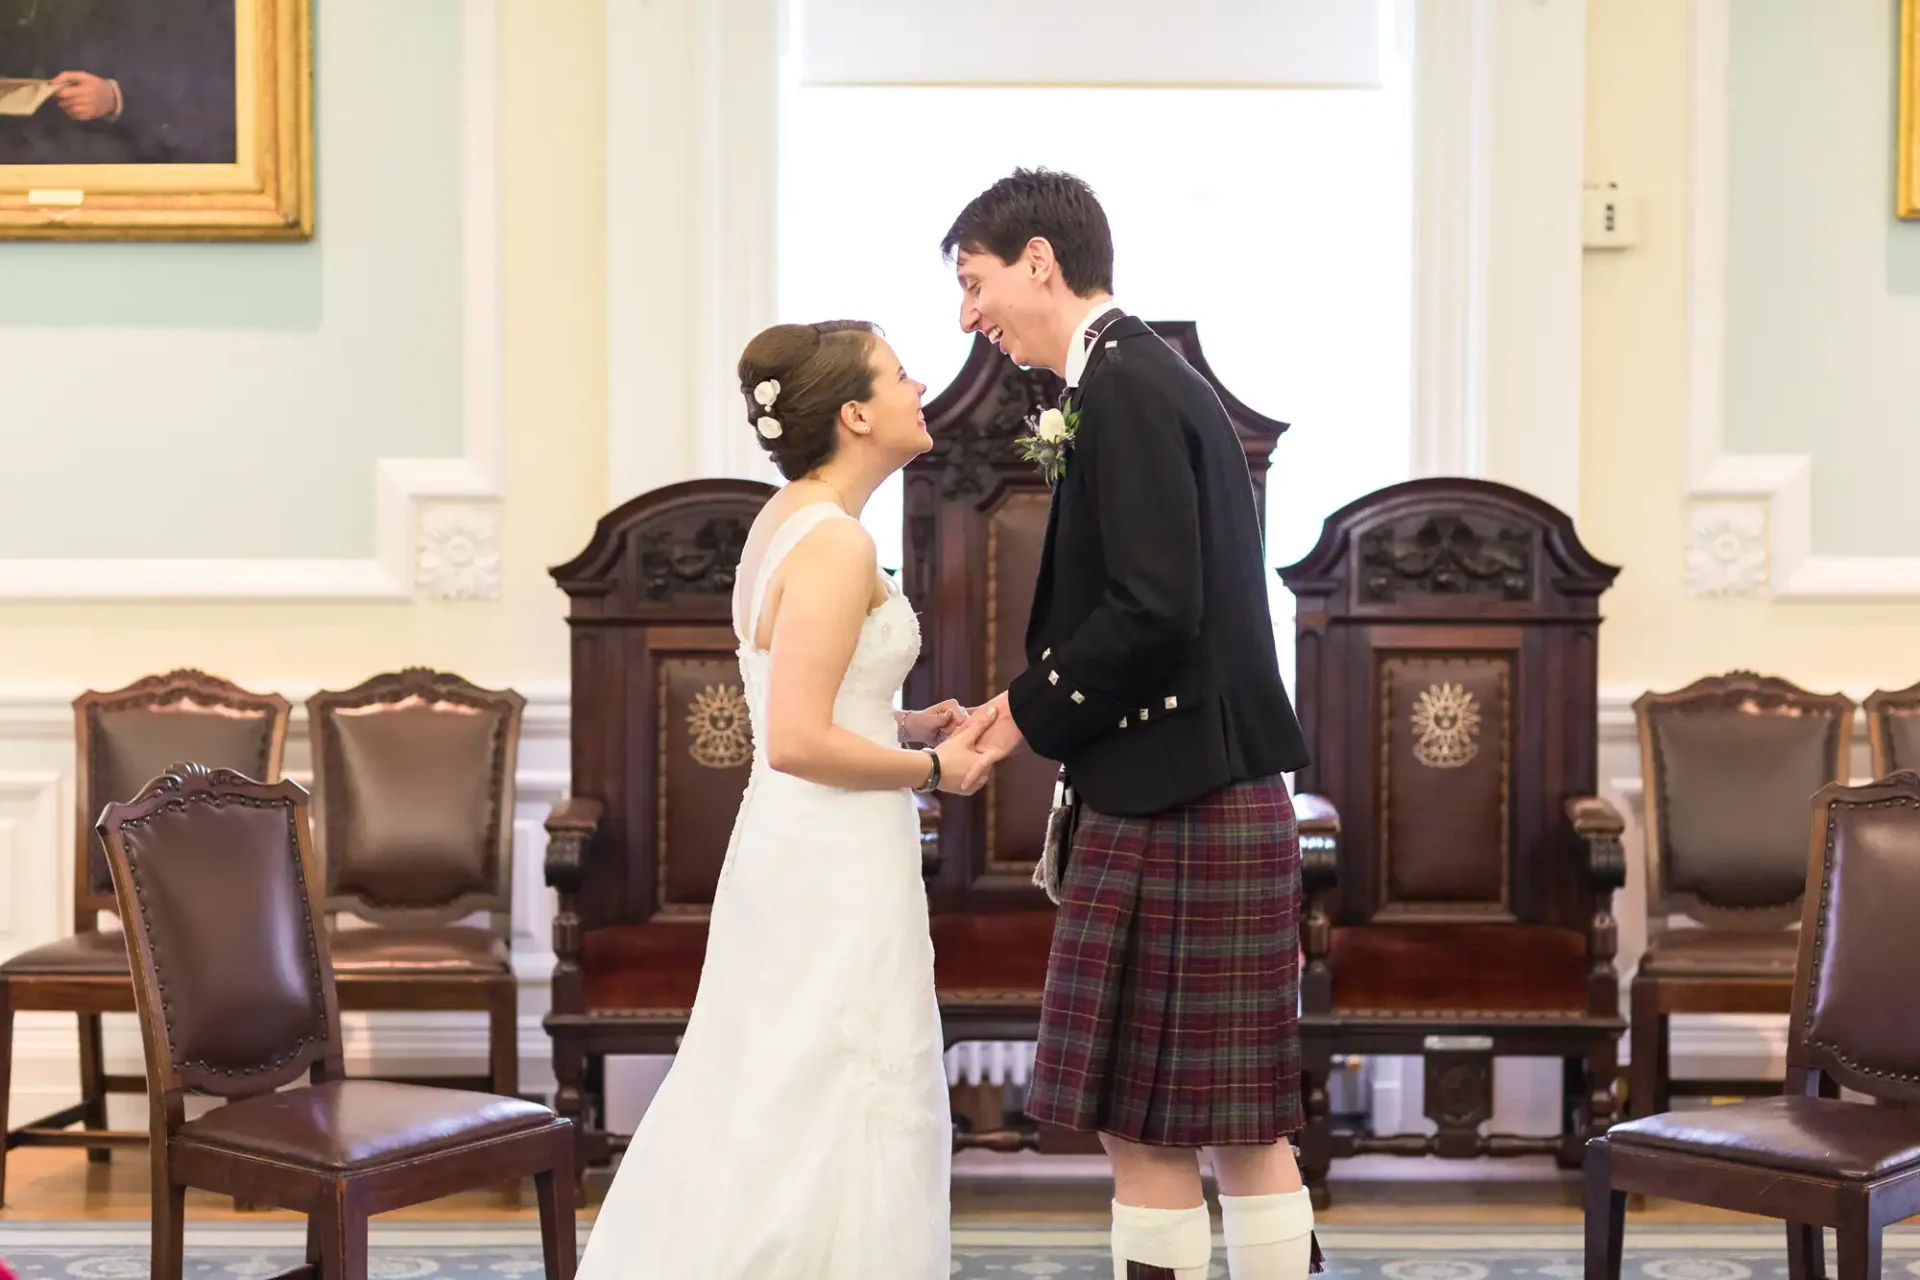 A bride in a white dress and a groom in a kilt hold hands and smile at each other in a formal room with wood-paneled walls and ornate chairs.